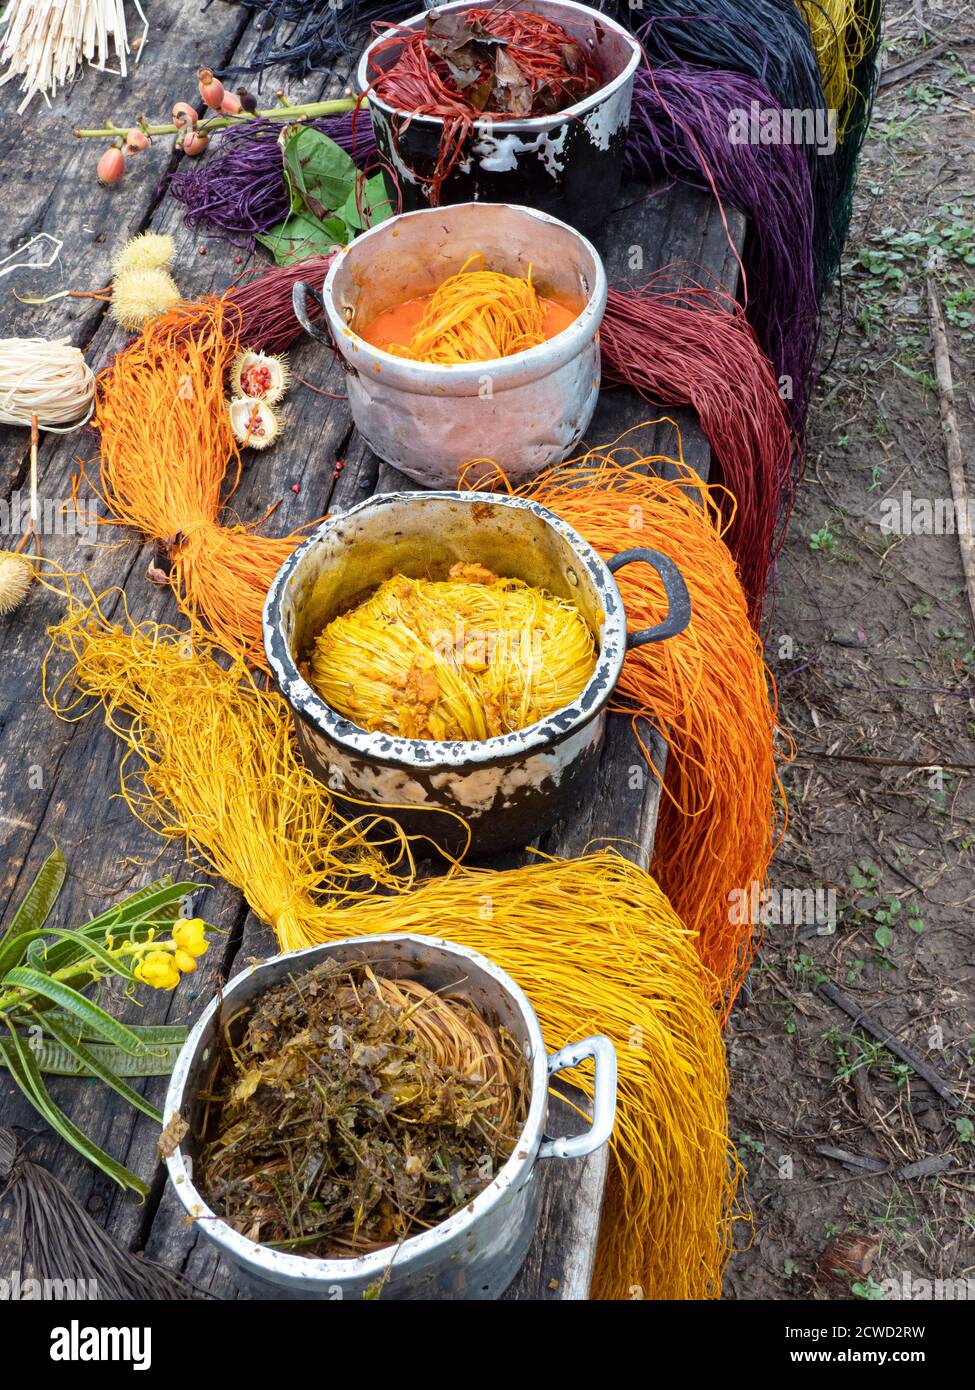 Local crafts people dying fiber to weave baskets in the village of Amazonas, Amazon Basin, Loreto, Peru. Stock Photo